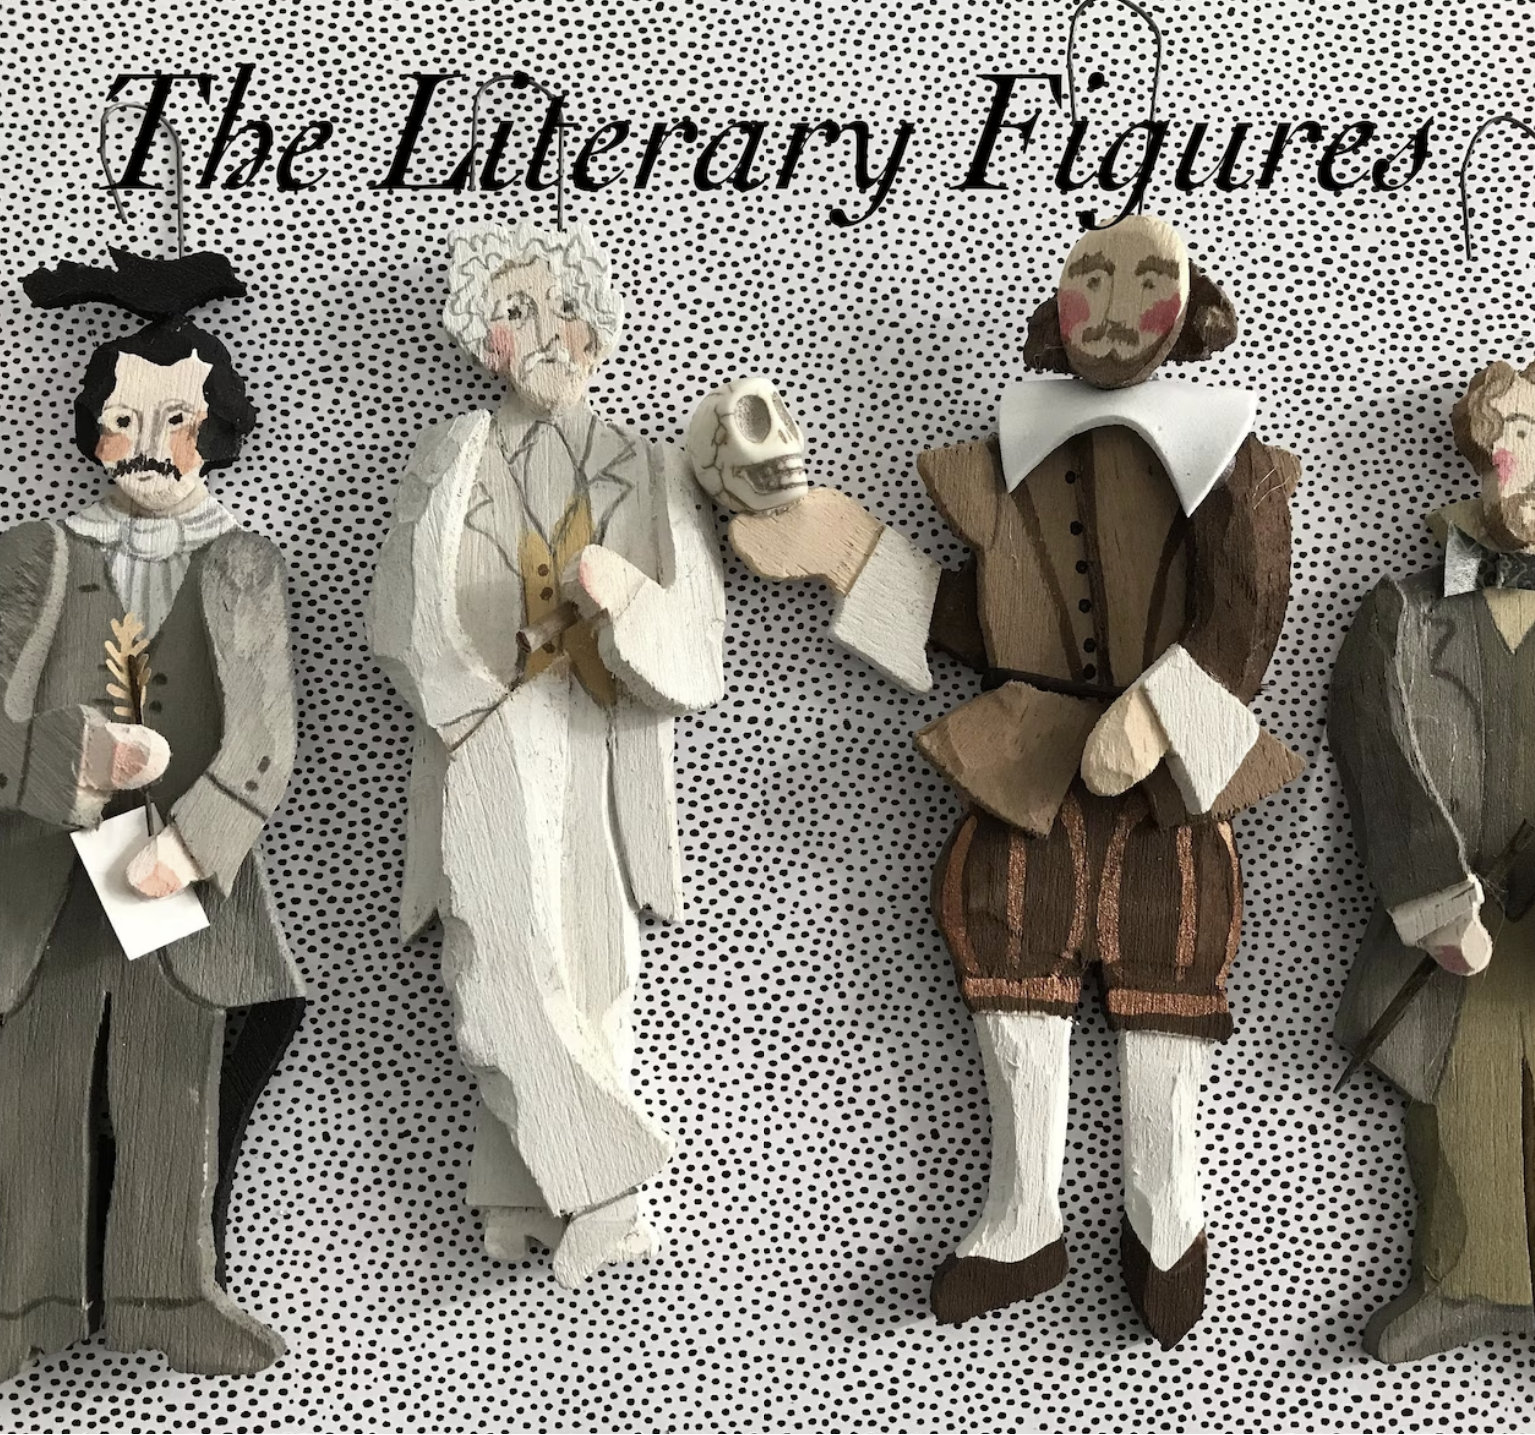 Wooden literary ornaments made to look like Edgar Allan Poe, Mark Twain, Shakespeare, and Charles Dickens. 